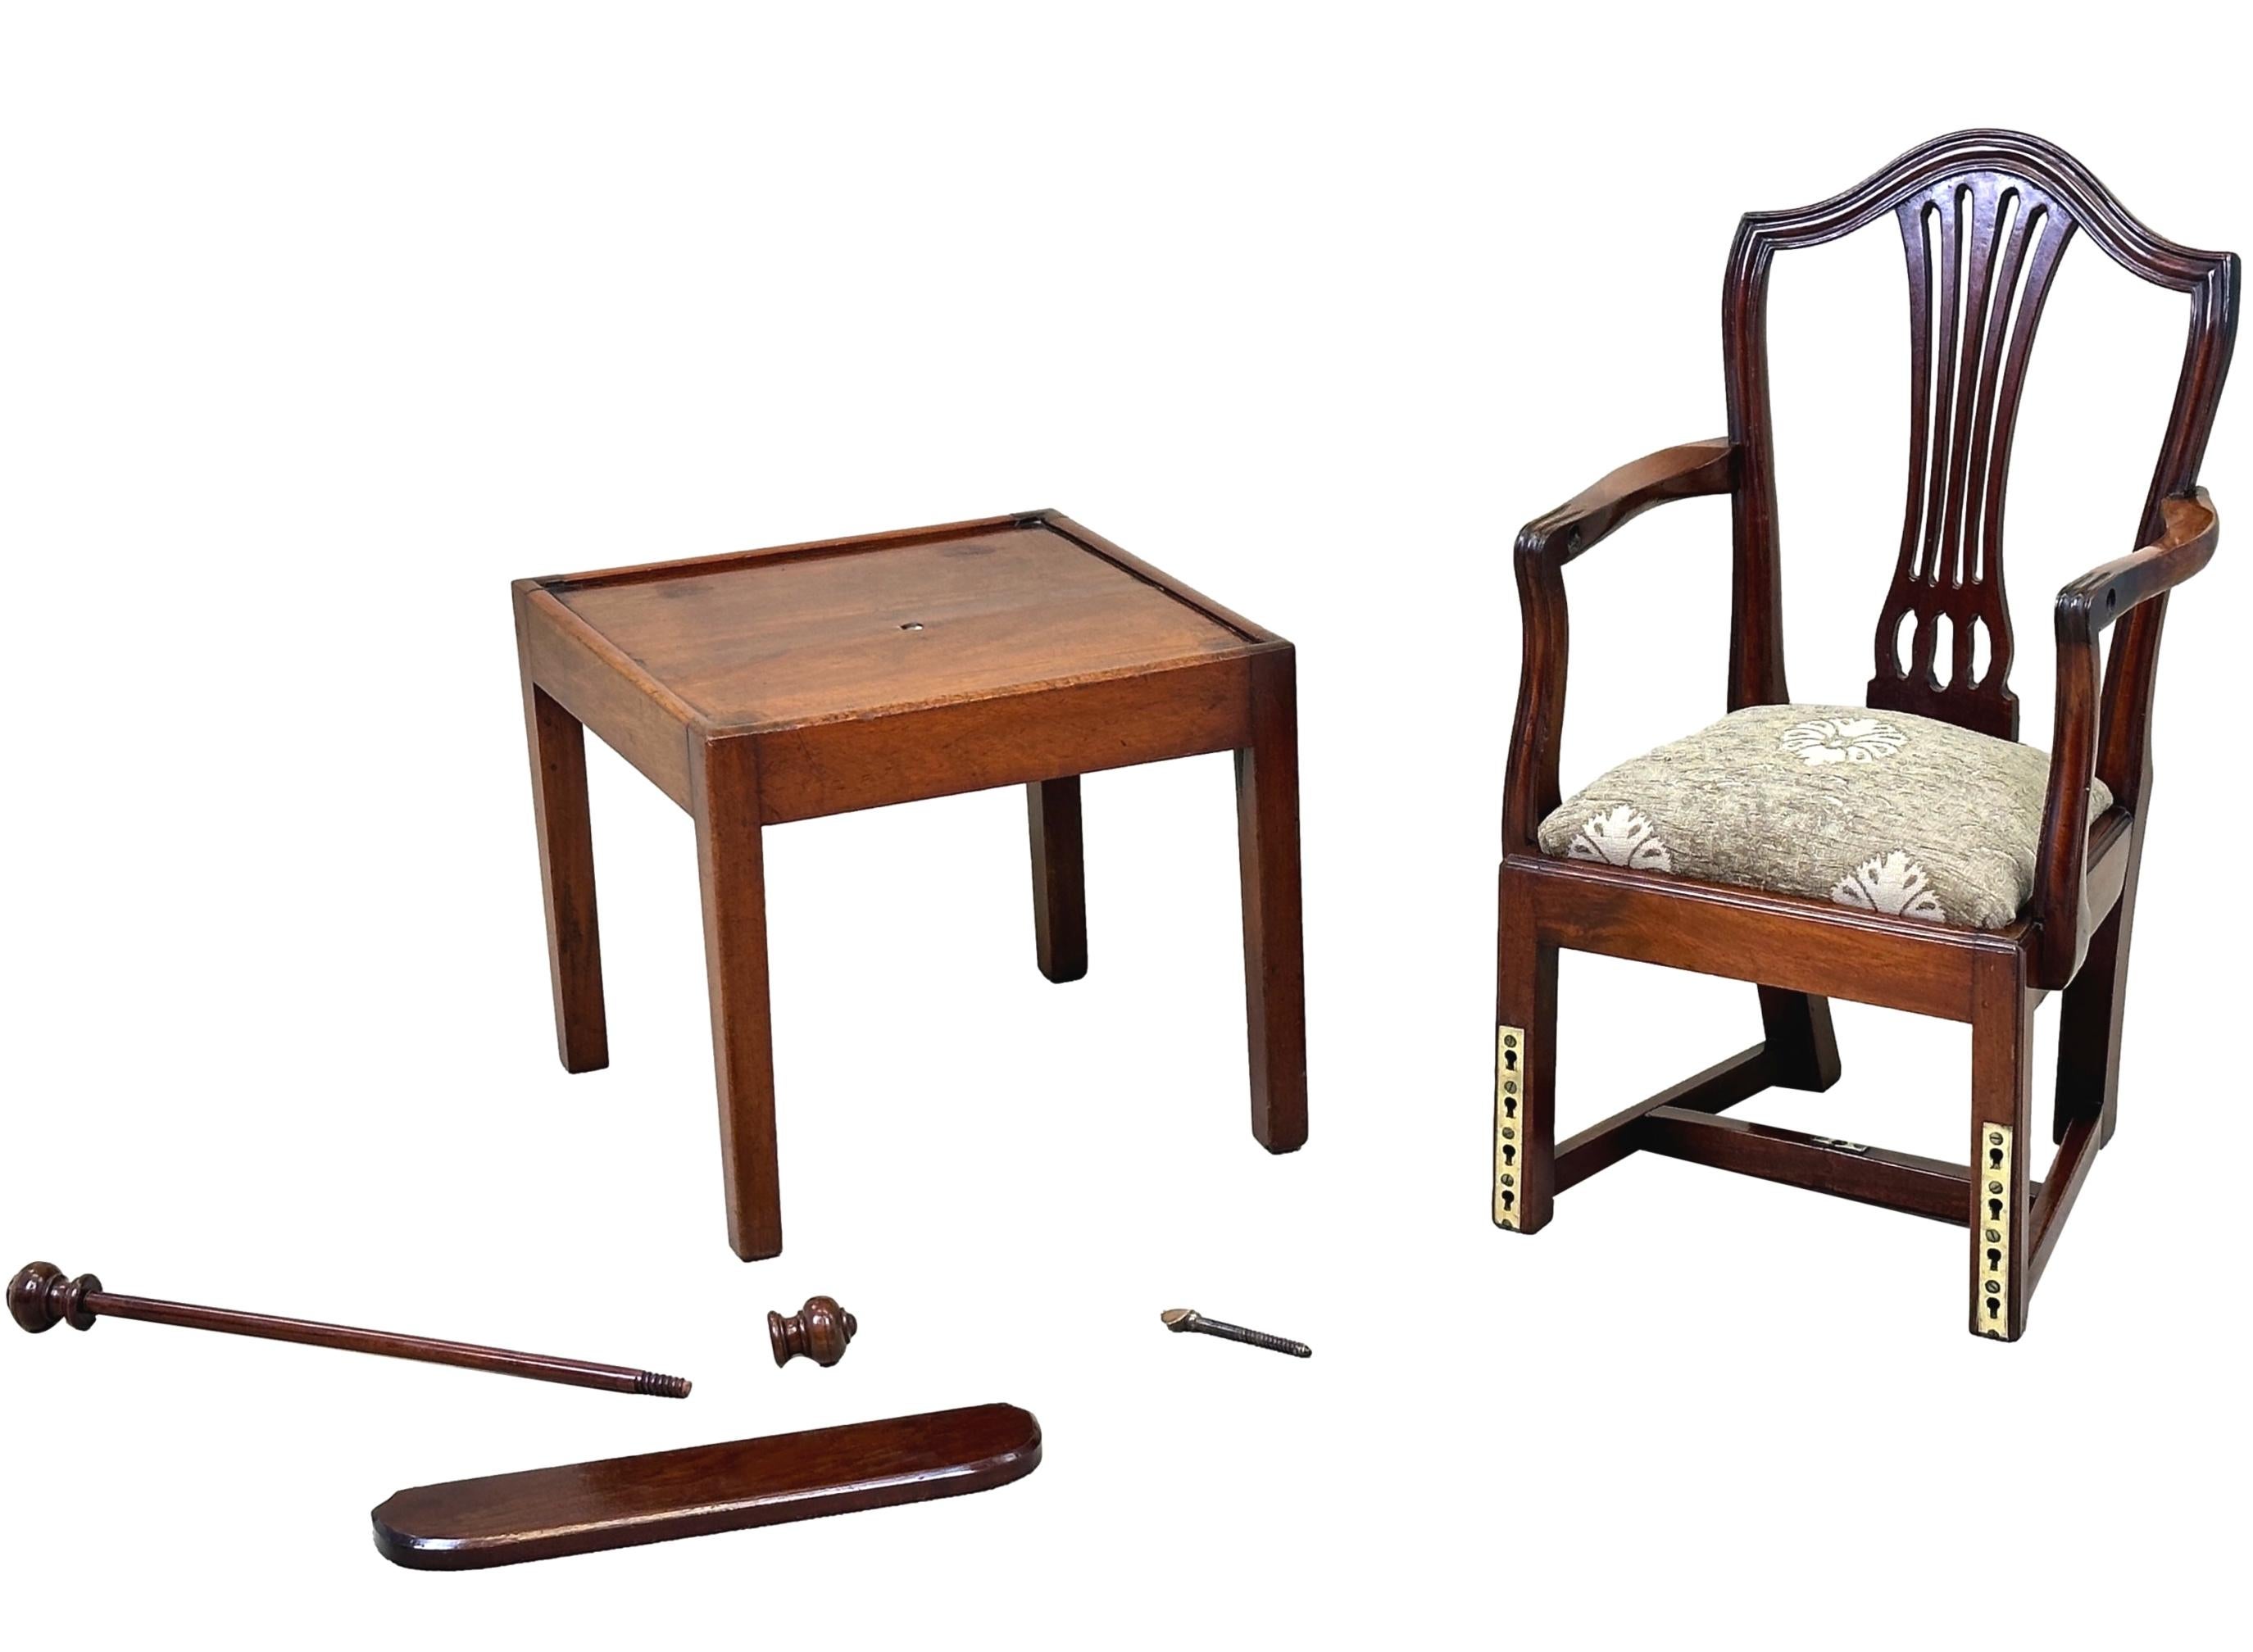 A Charming Late 18th Century Georgian, Mahogany, Hepplewhite Period Childs High Chairs, Having Camel Back With Elegant Pierced Splat, Scrolling Arms, Removable Safety Bar And Adjustable Foot Rest Over Detachable Mahogany Table Stand Raised On Square